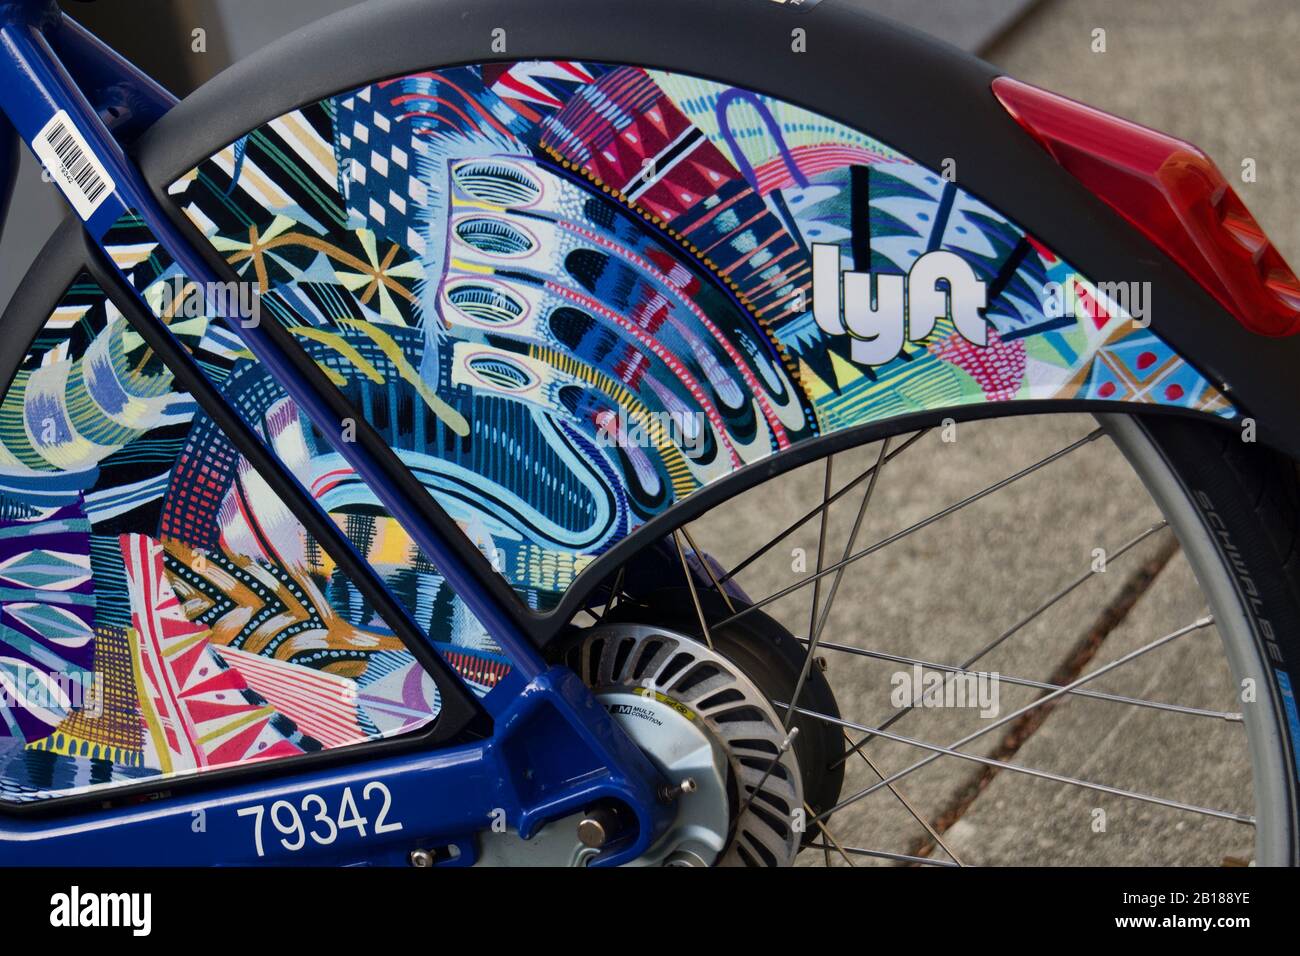 Parked public Lyft bicycle at bikeshare station with colorful back wheel coat guard. Sustainable carbon-free transportation option. Berkeley, CA Stock Photo